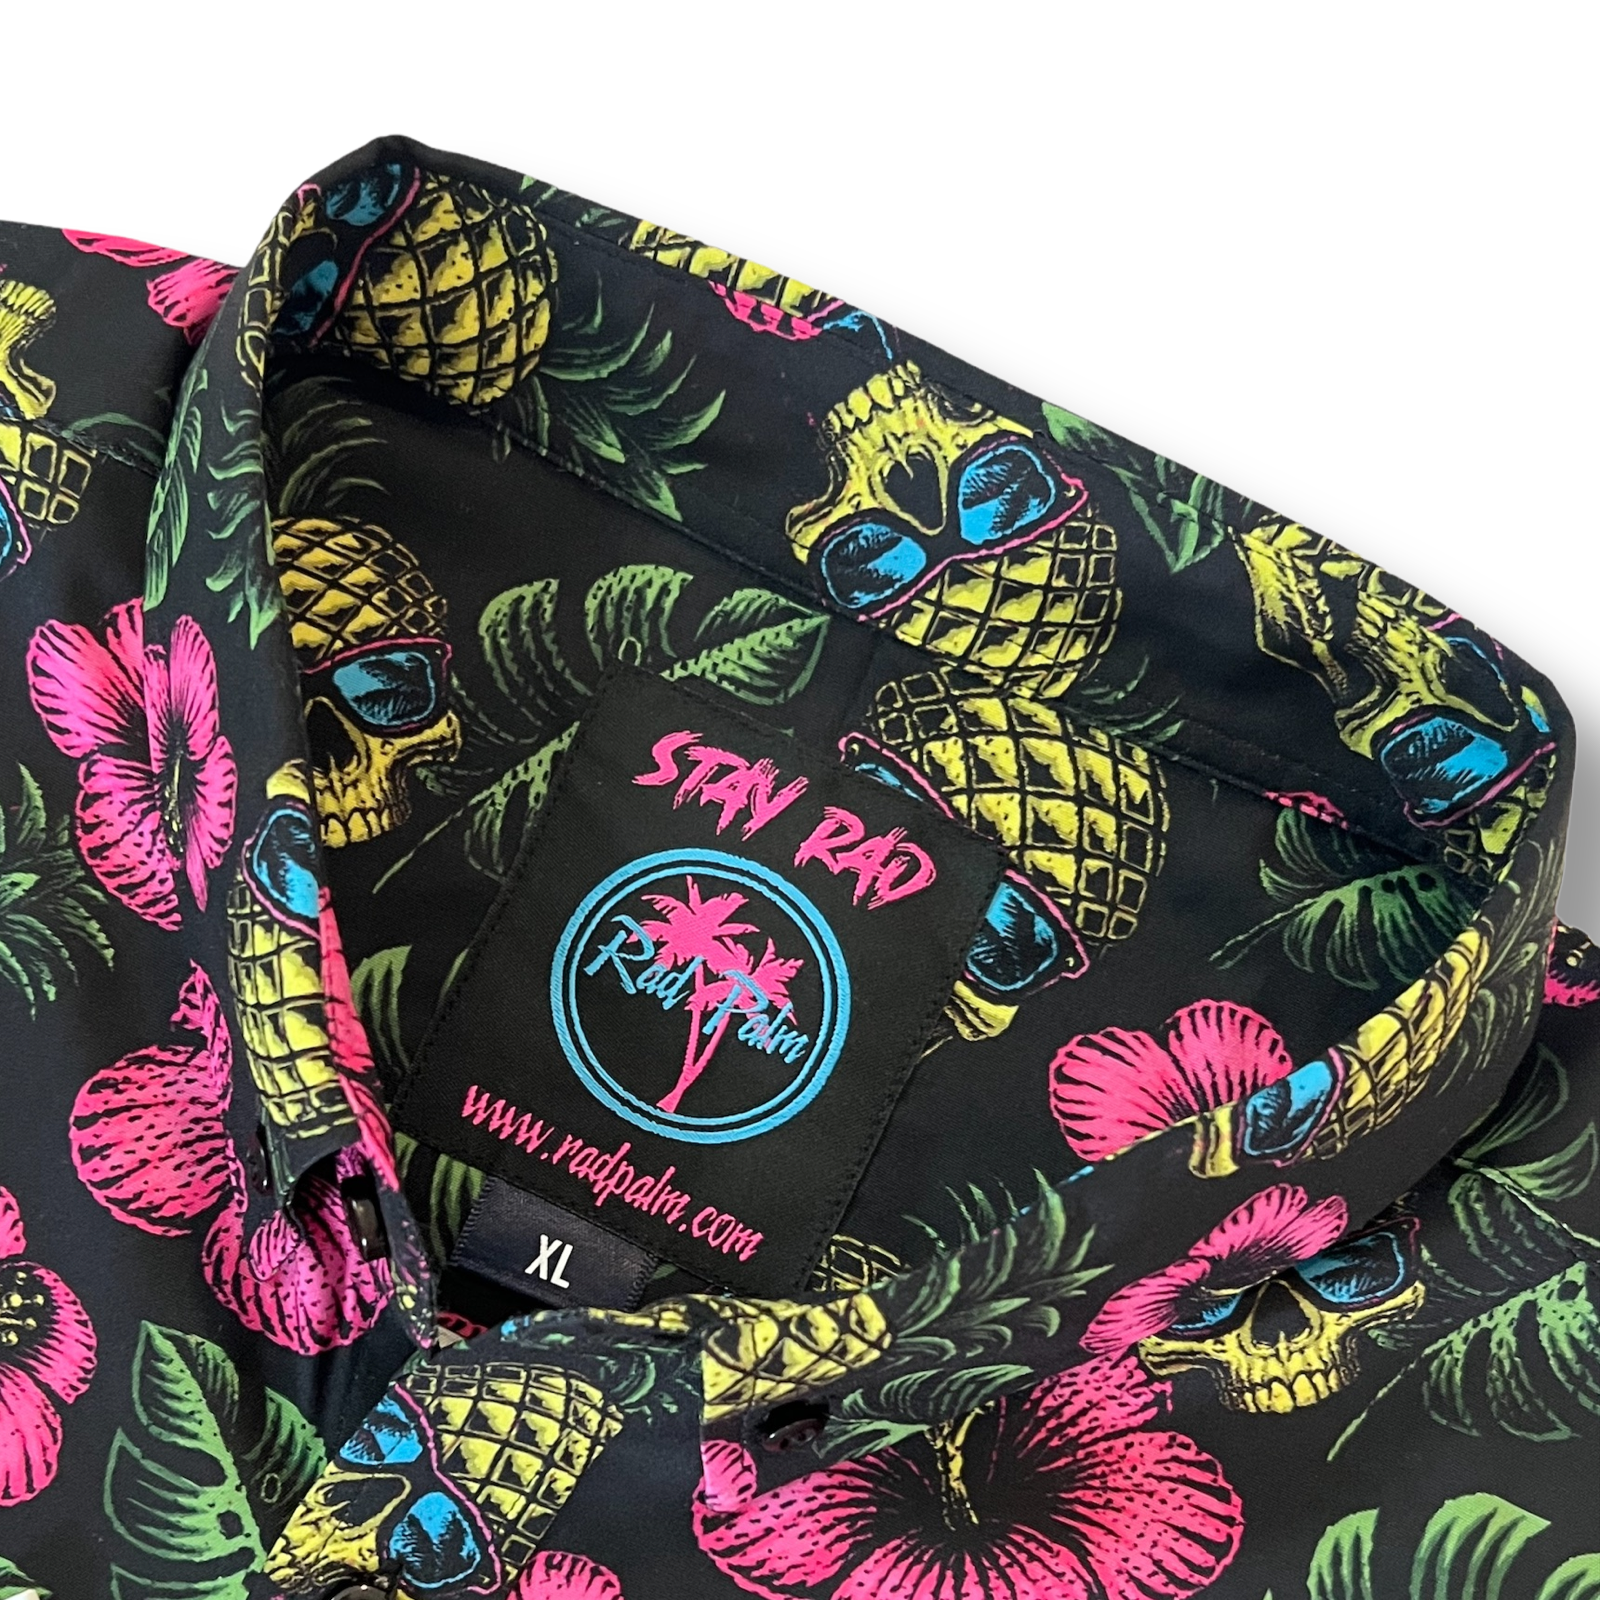 Pineapple Head Party Shirt